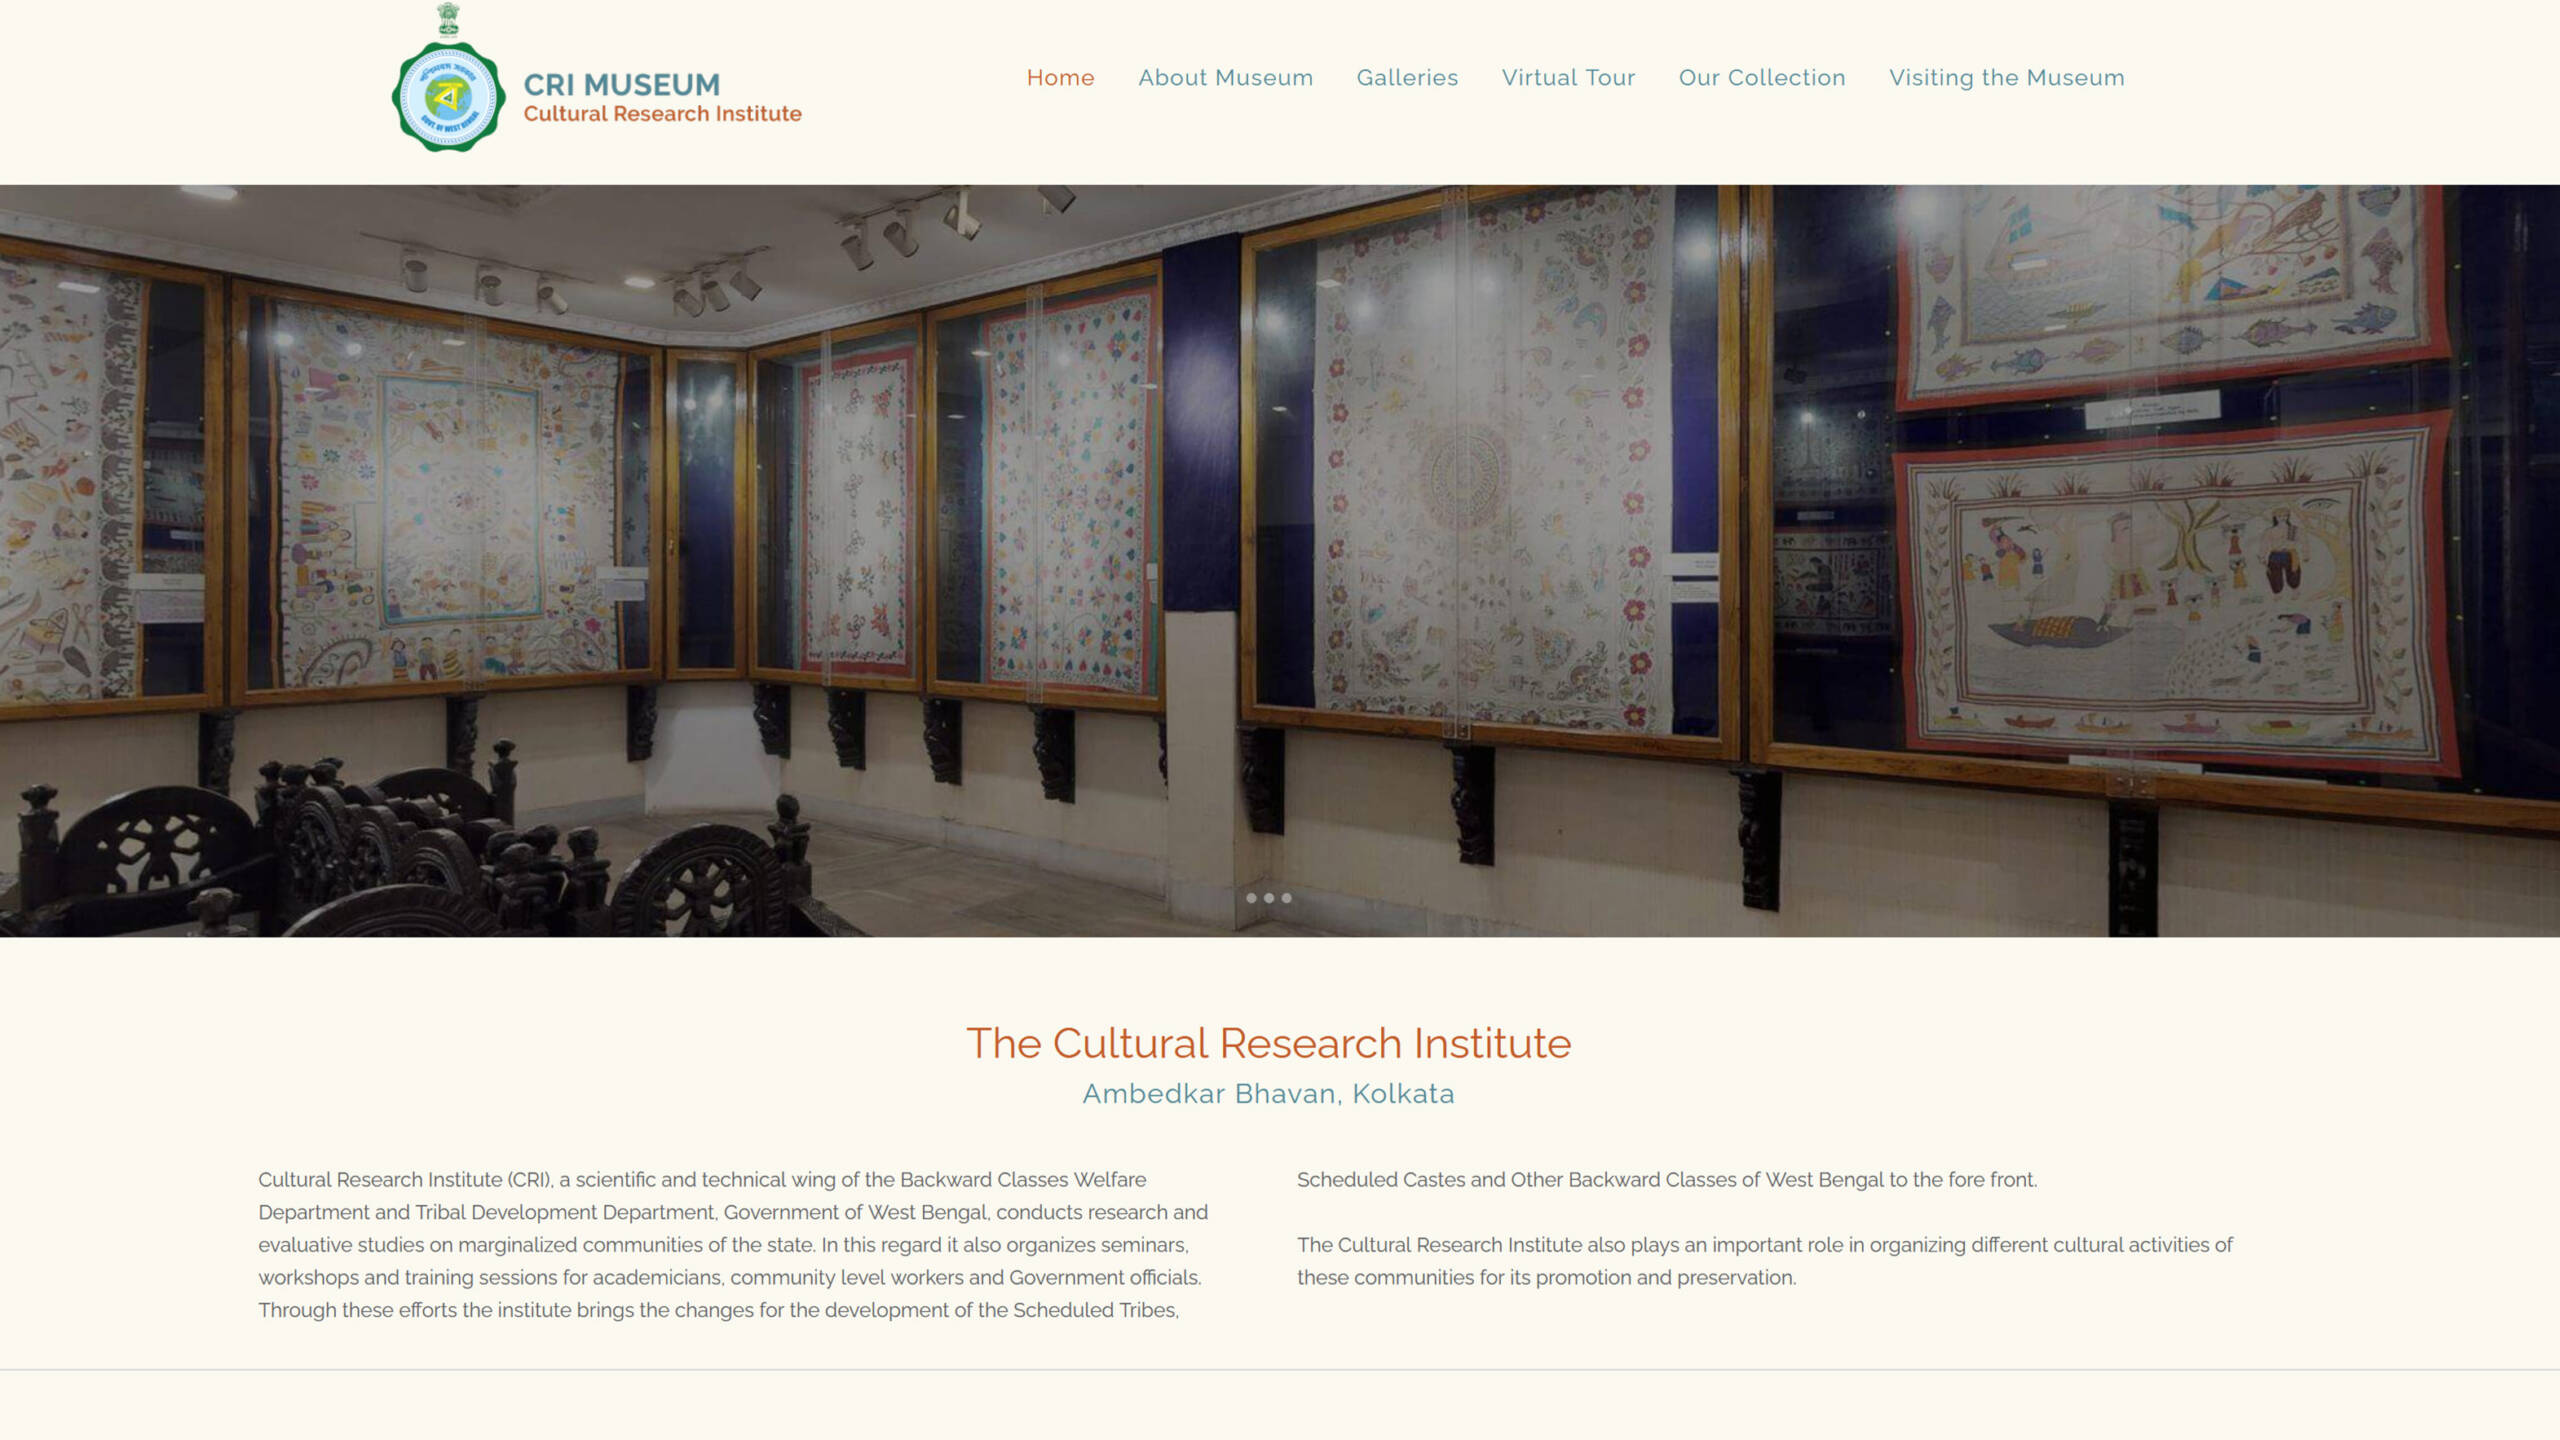 Home page of the website of CRI museum